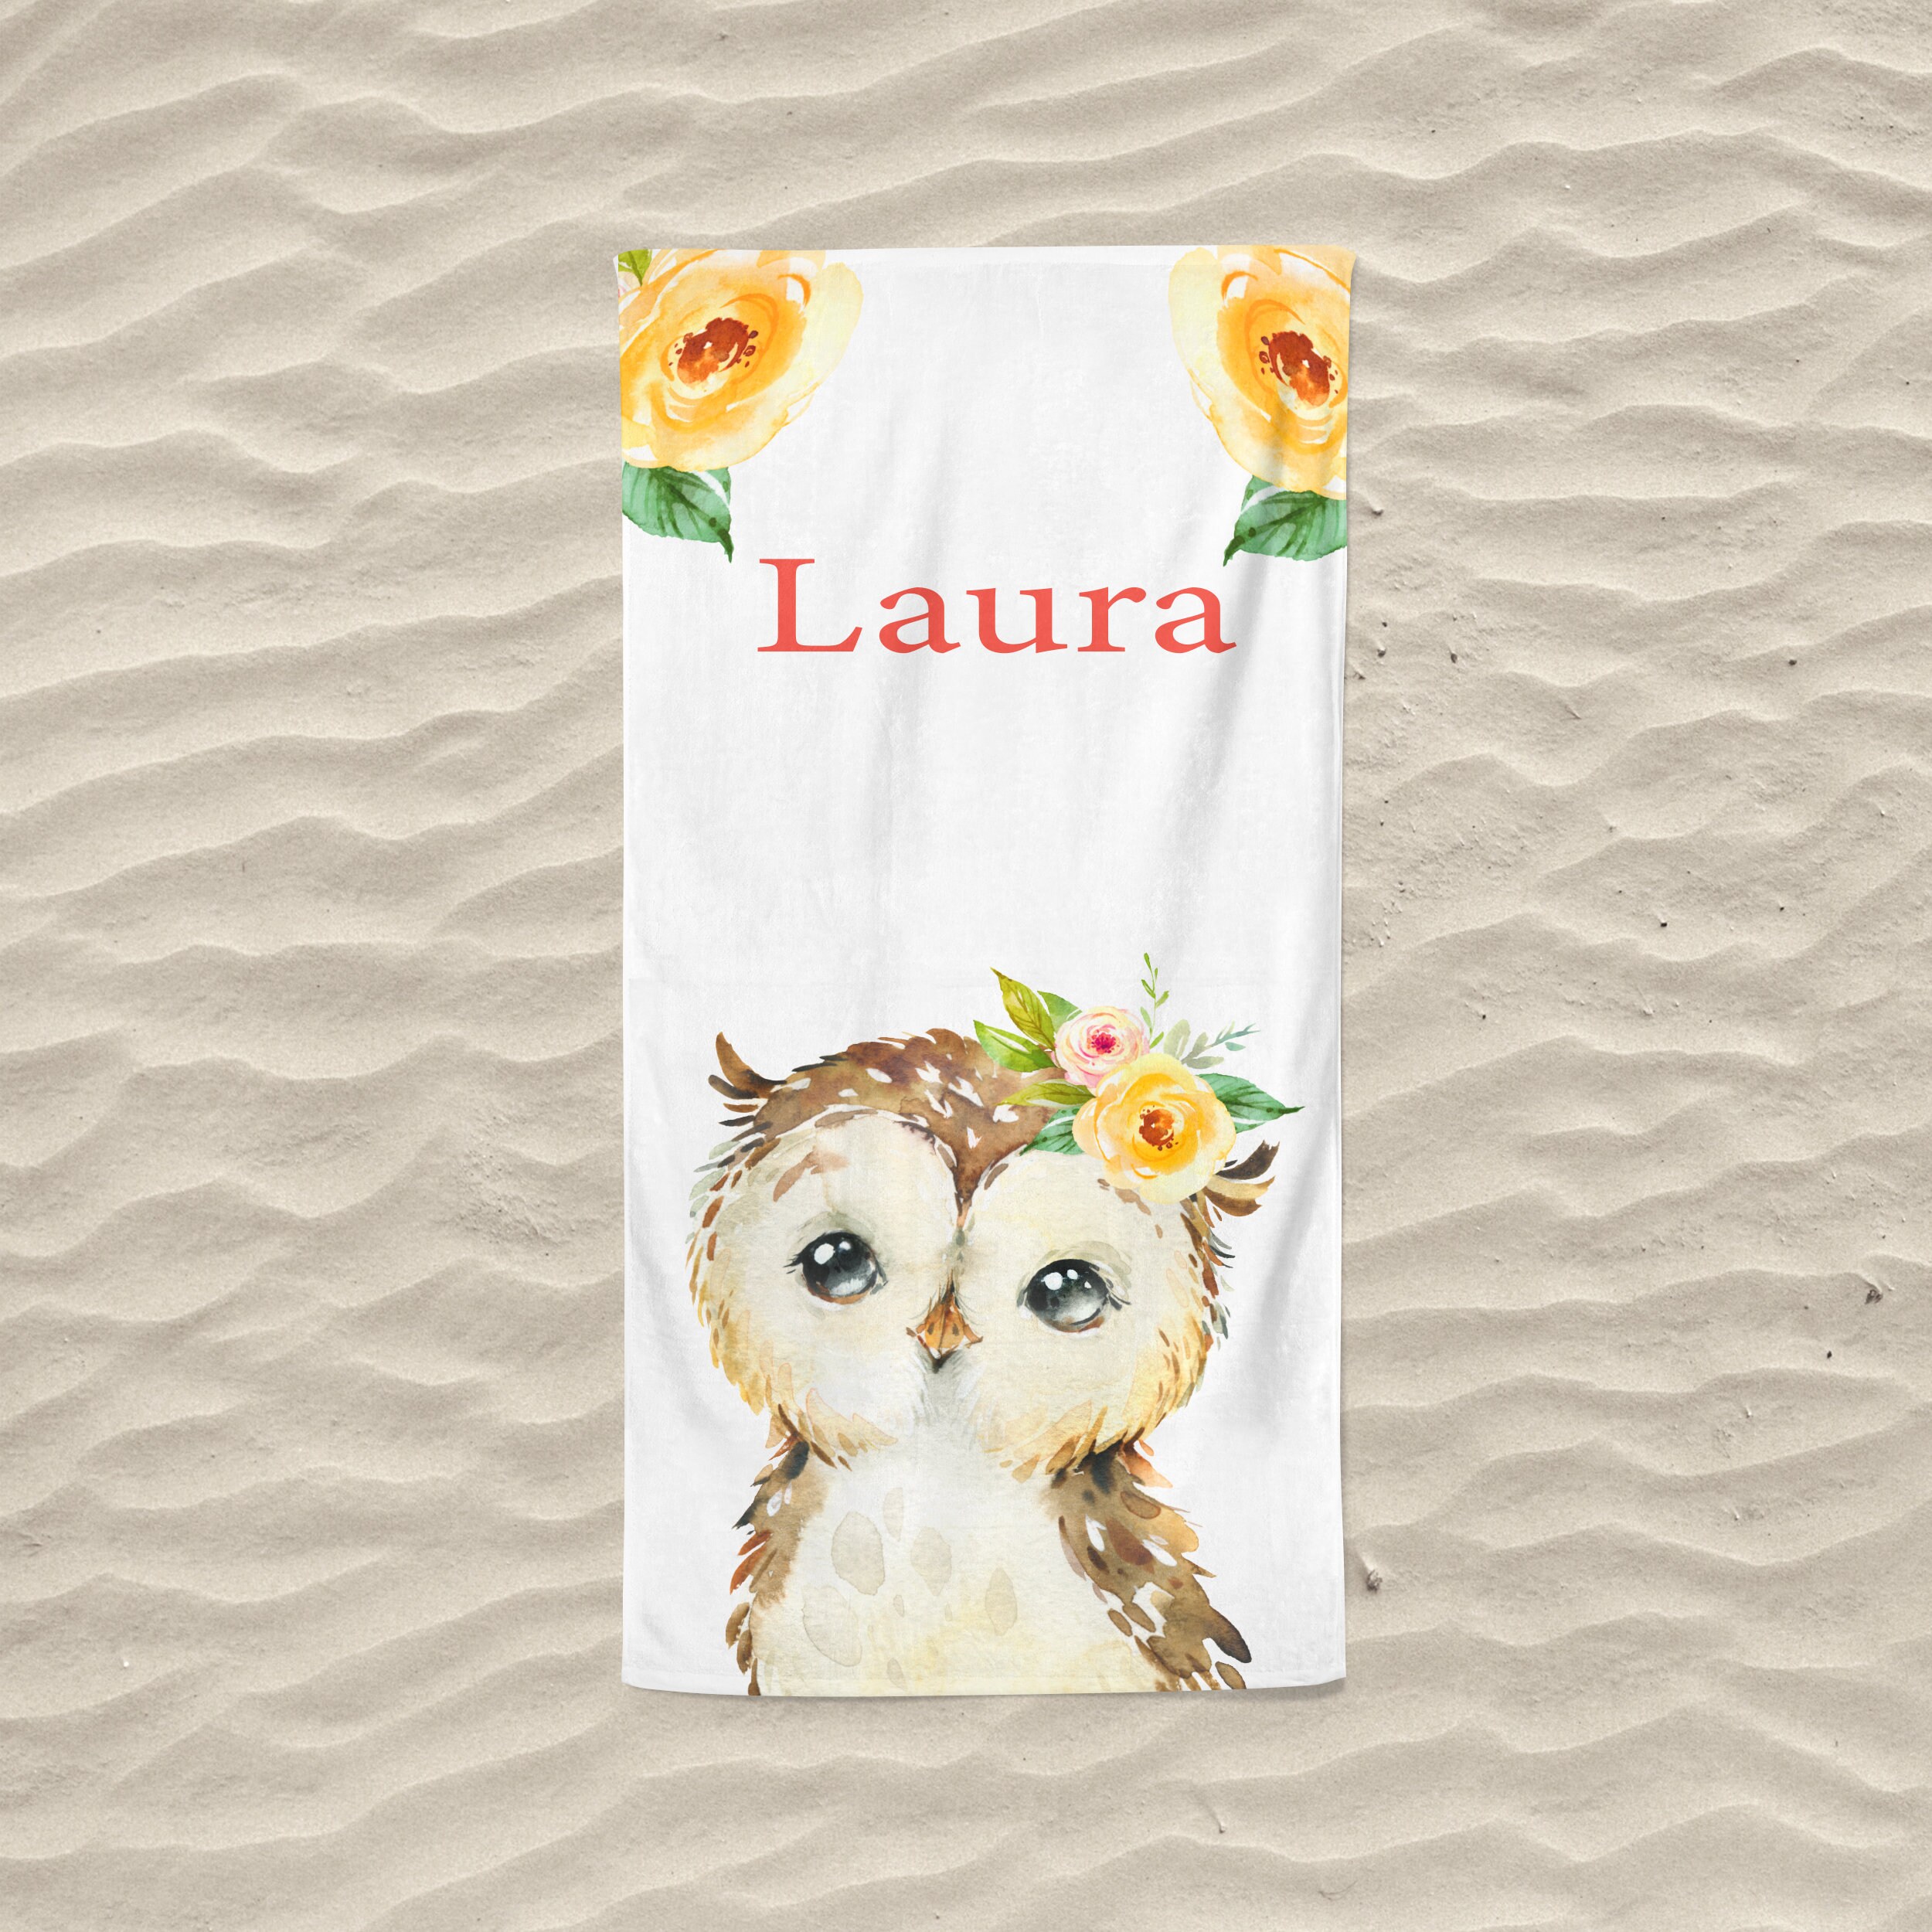 Beach Towel Personalized, Personalized Towels, Child Beach Towel, Customized Boys Beach Towel, Kids 